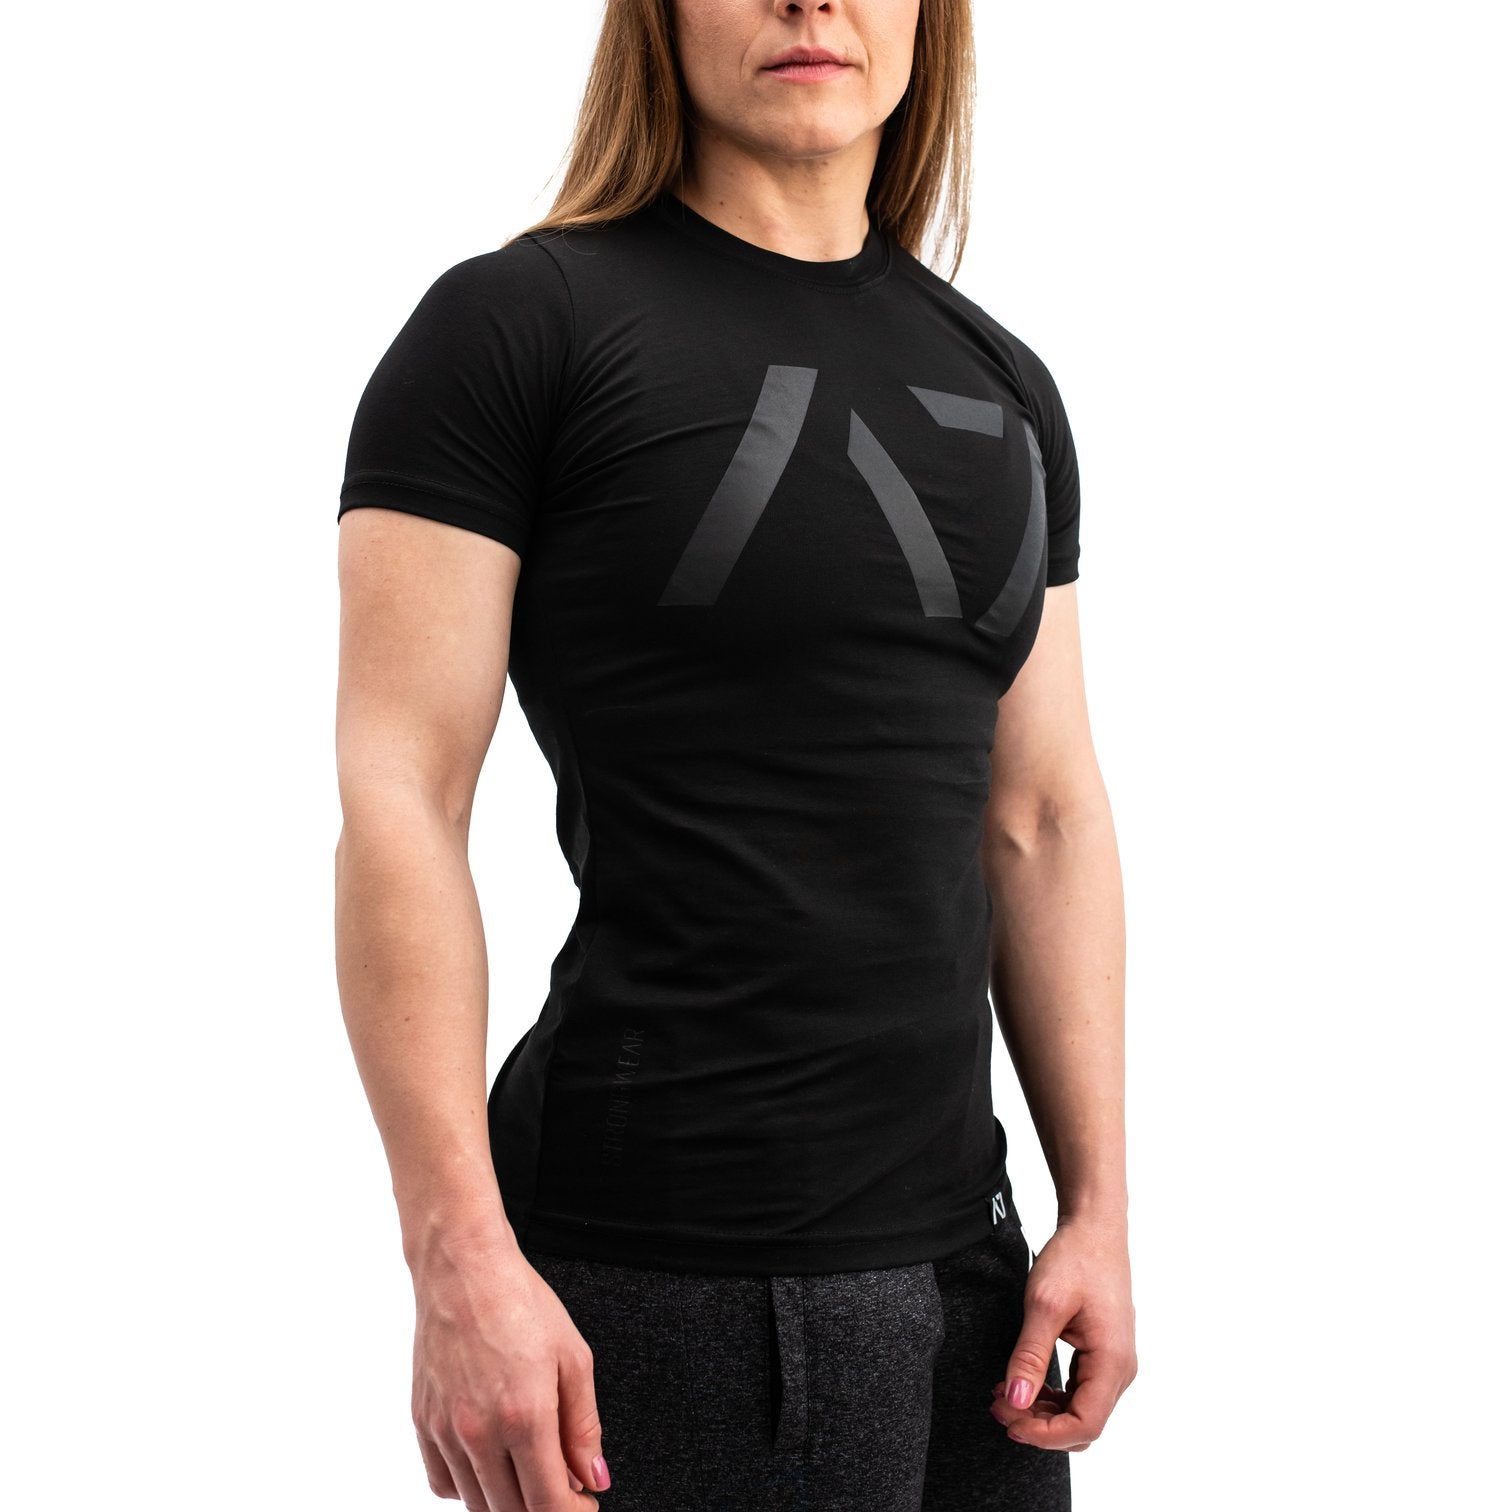 Stealth Bar Grip T-shirt, great as a squat shirt. Purchase Stealth Bar Grip tshirt UK from A7 UK. Purchase Stealth Bar Grip Shirt Europe from A7 UK. No more chalk and no more sliding. Best Bar Grip Tshirts, shipping to UK and Europe from A7 UK. Stealth is our classic black on black shirt design! The best Powerlifting apparel for all your workouts. Available in UK and Europe including France, Italy, Germany, Sweden and Poland